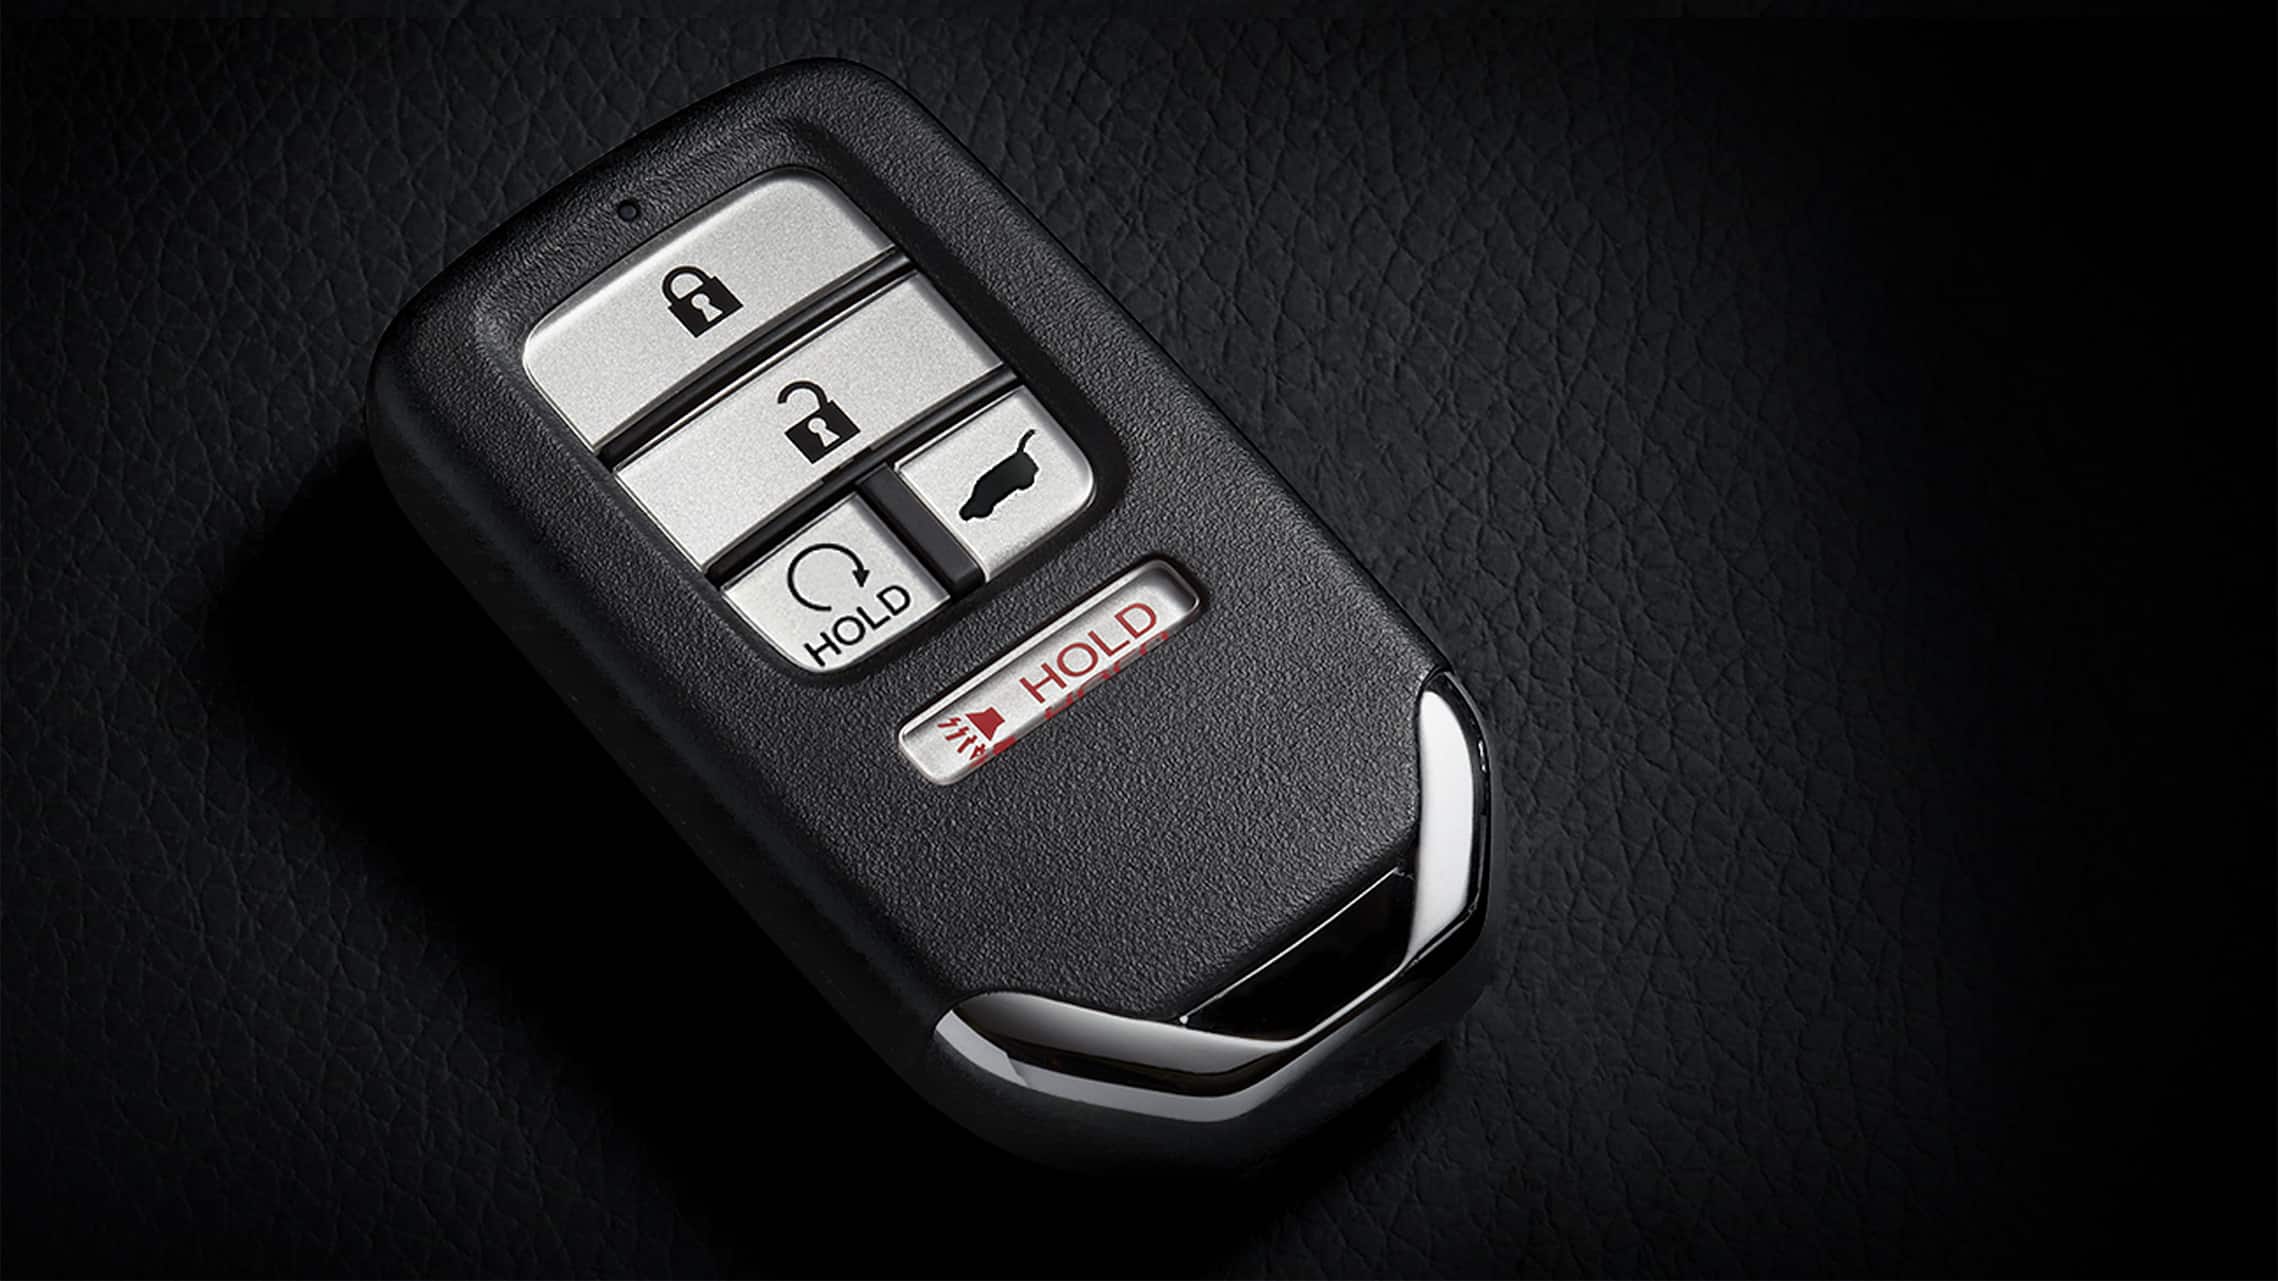 Key fob with remote engine start button detail for the 2021 Honda Civic Sport Touring Hatchback.